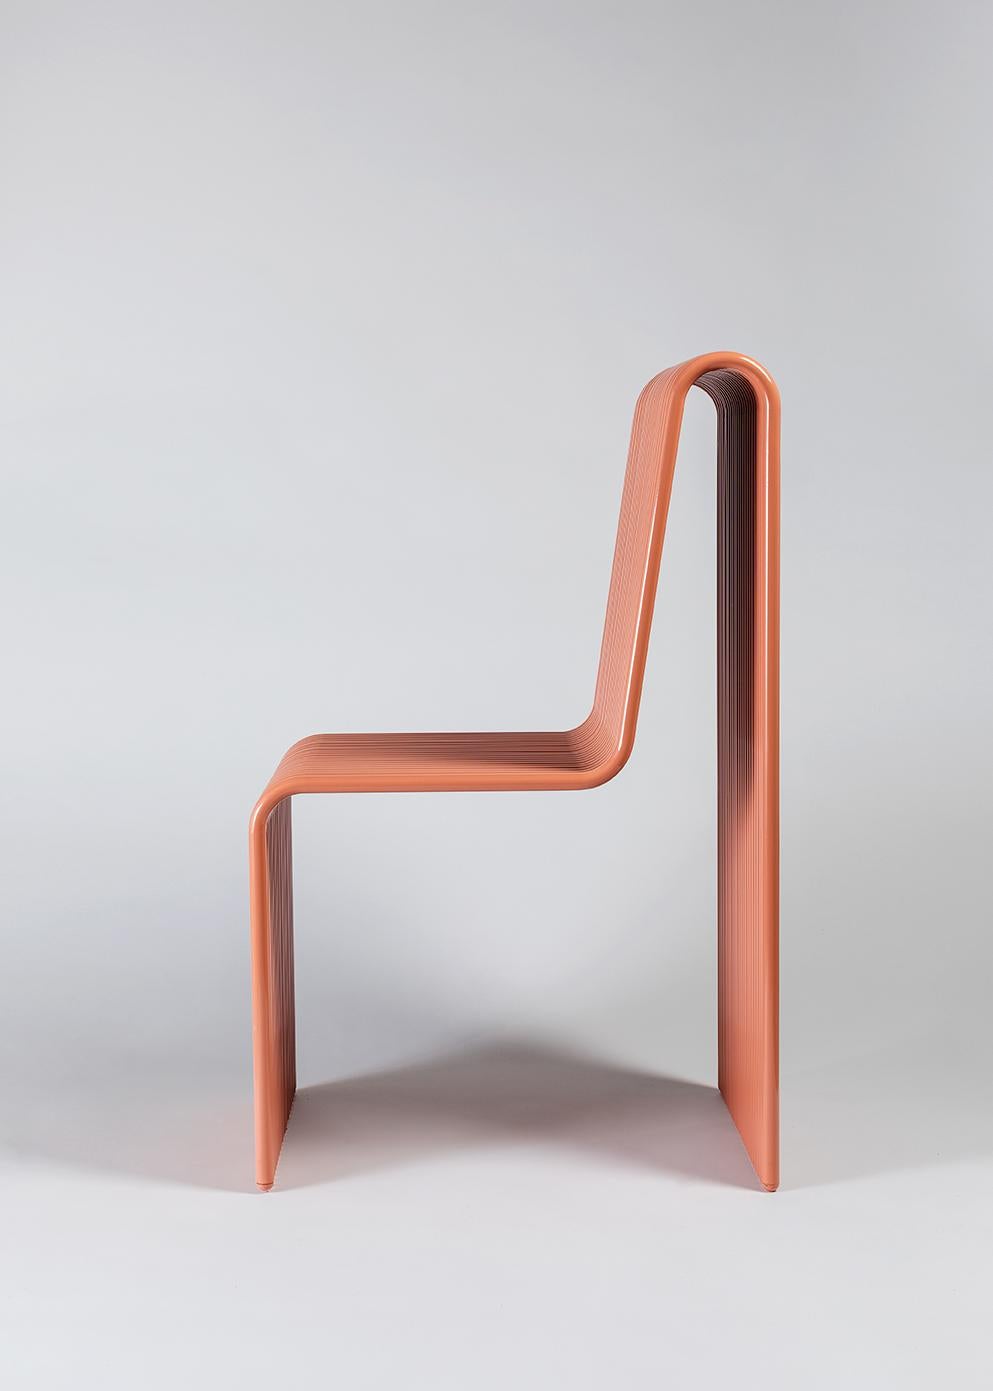 Simultaneously delicate and bold, the Ribbon chair is a playful addition to the LAUN catalog. The layered aluminum tubes stack together to form either a solid or multicolored array and allows for custom widths in an infinite combination of forms.